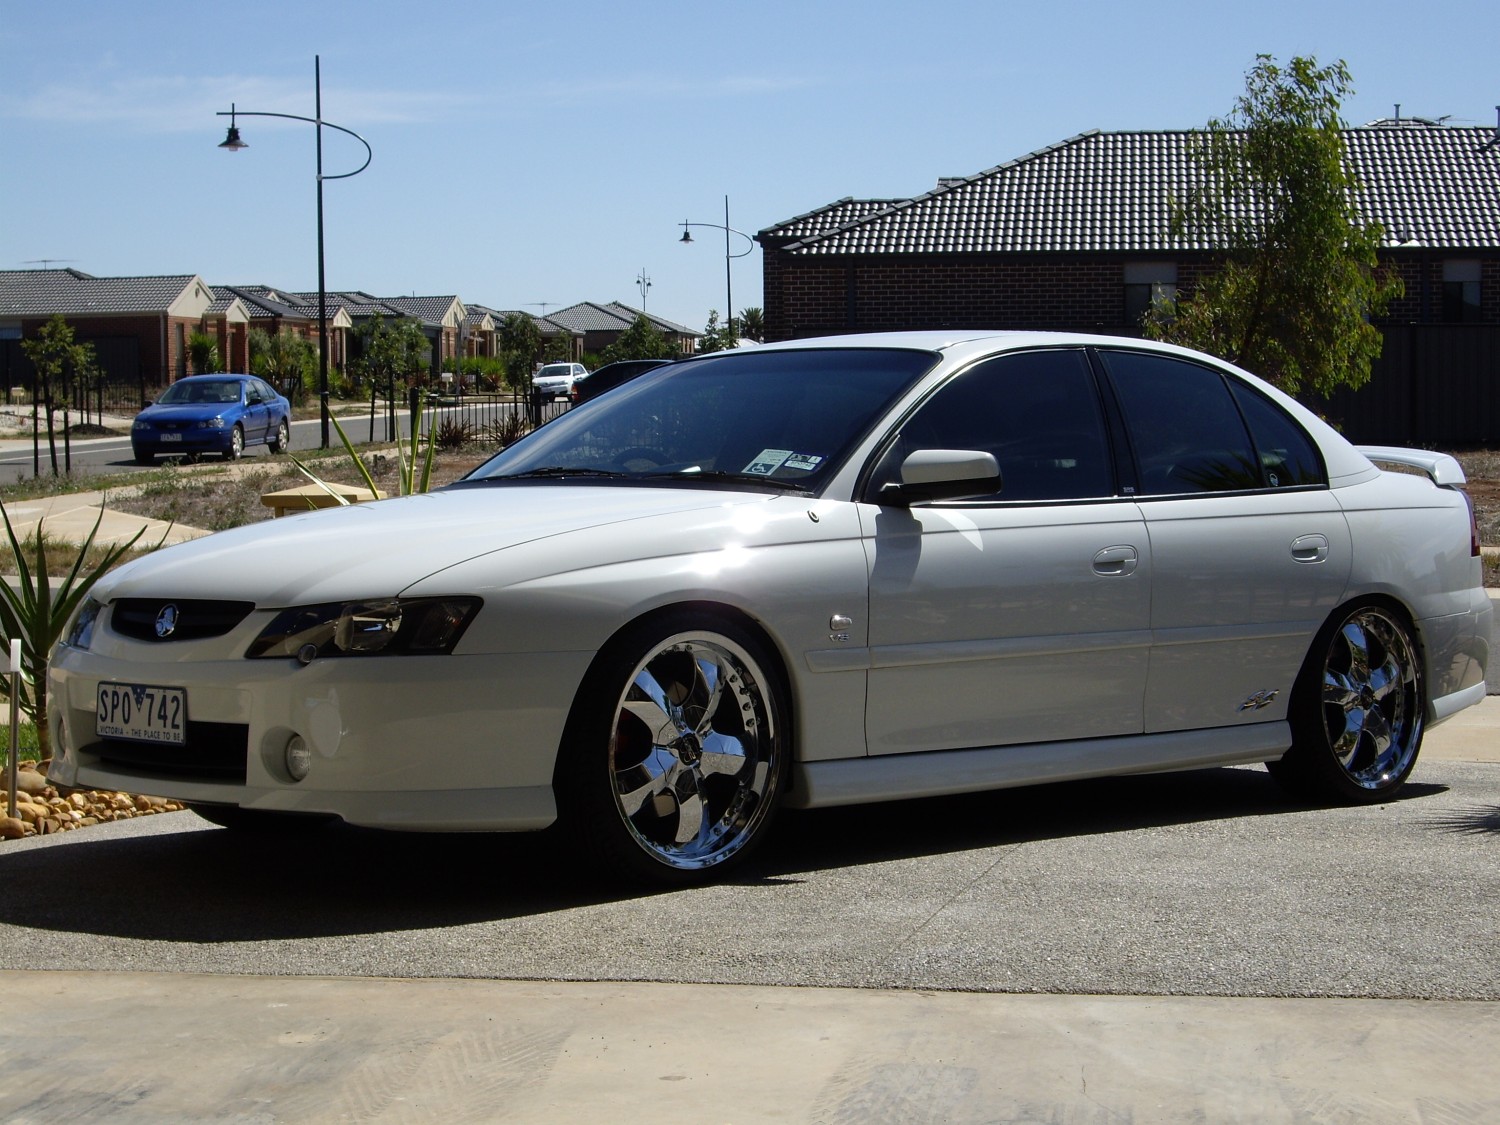 2004 Holden VY SS Series 2 Commodore - adrian01 - Shannons Club